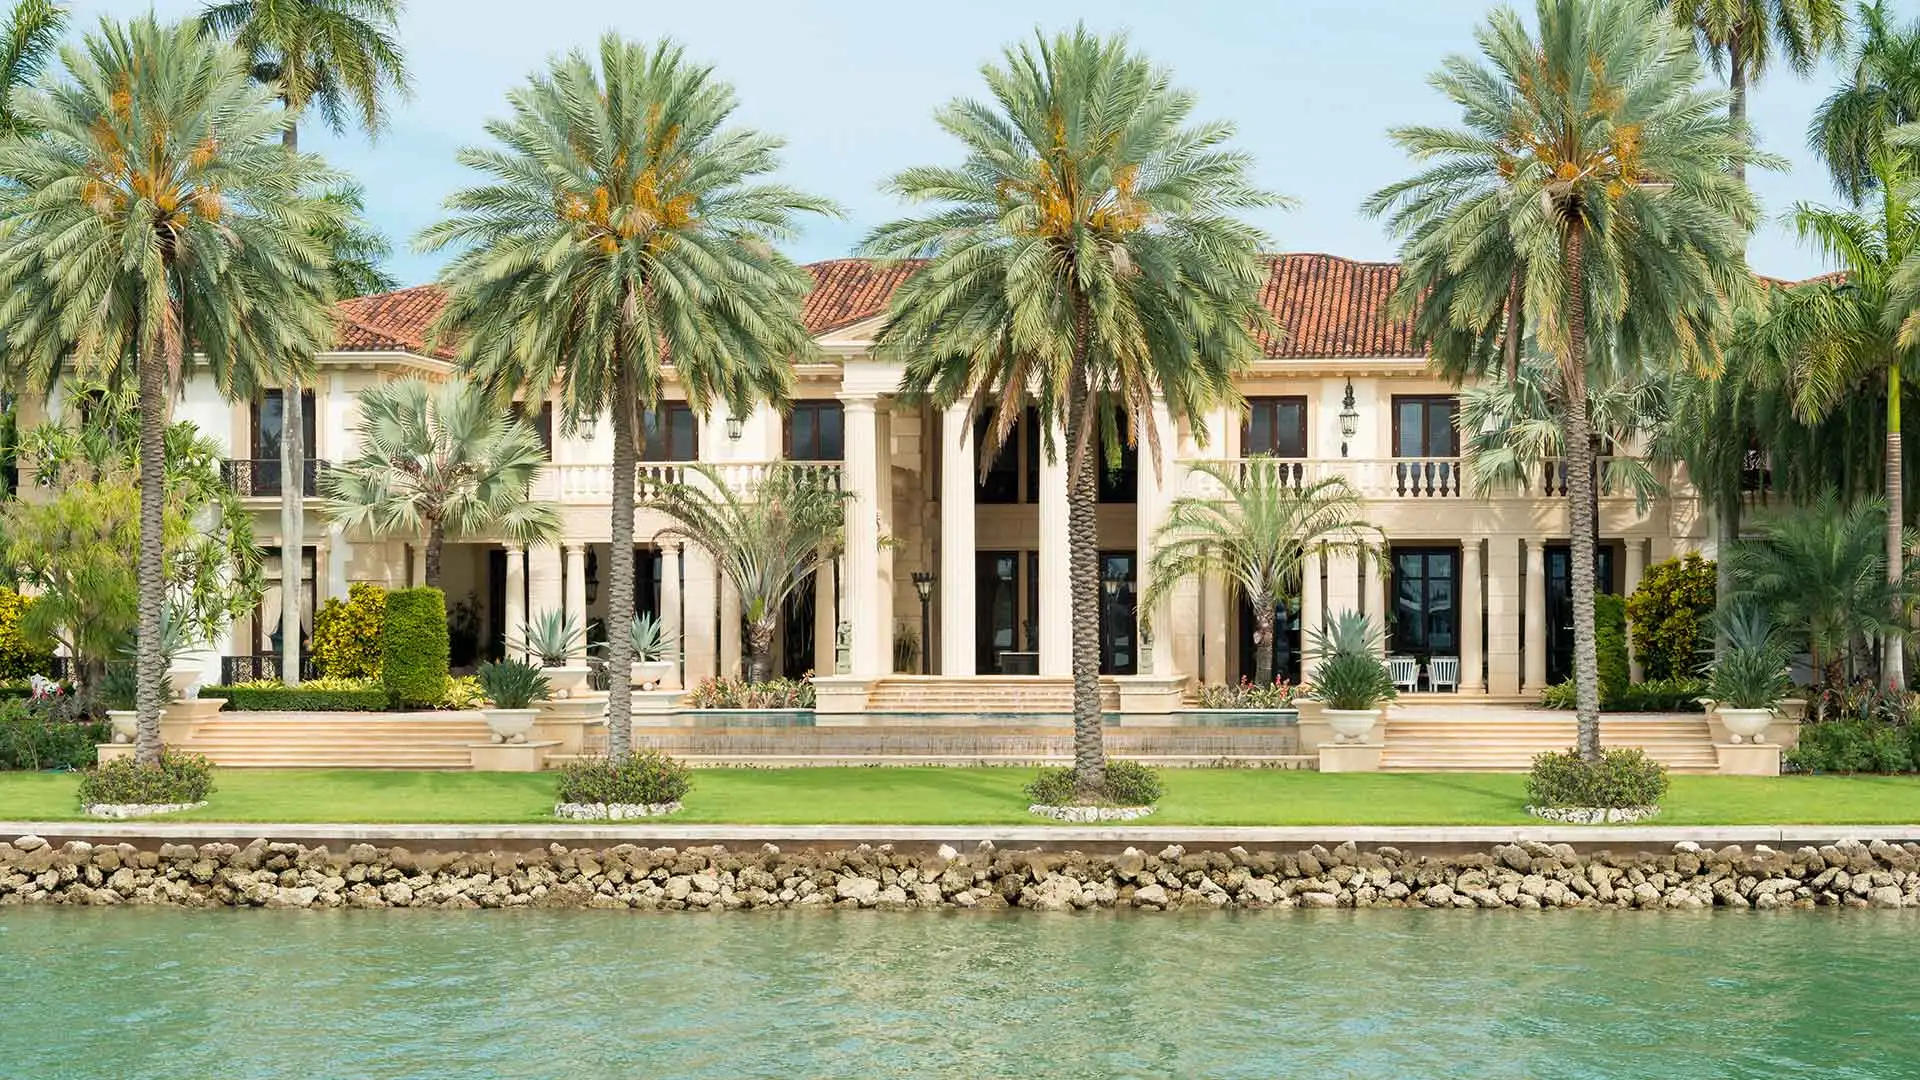 This waterfront estate in Wellington, FL has well-manicured landscaping.